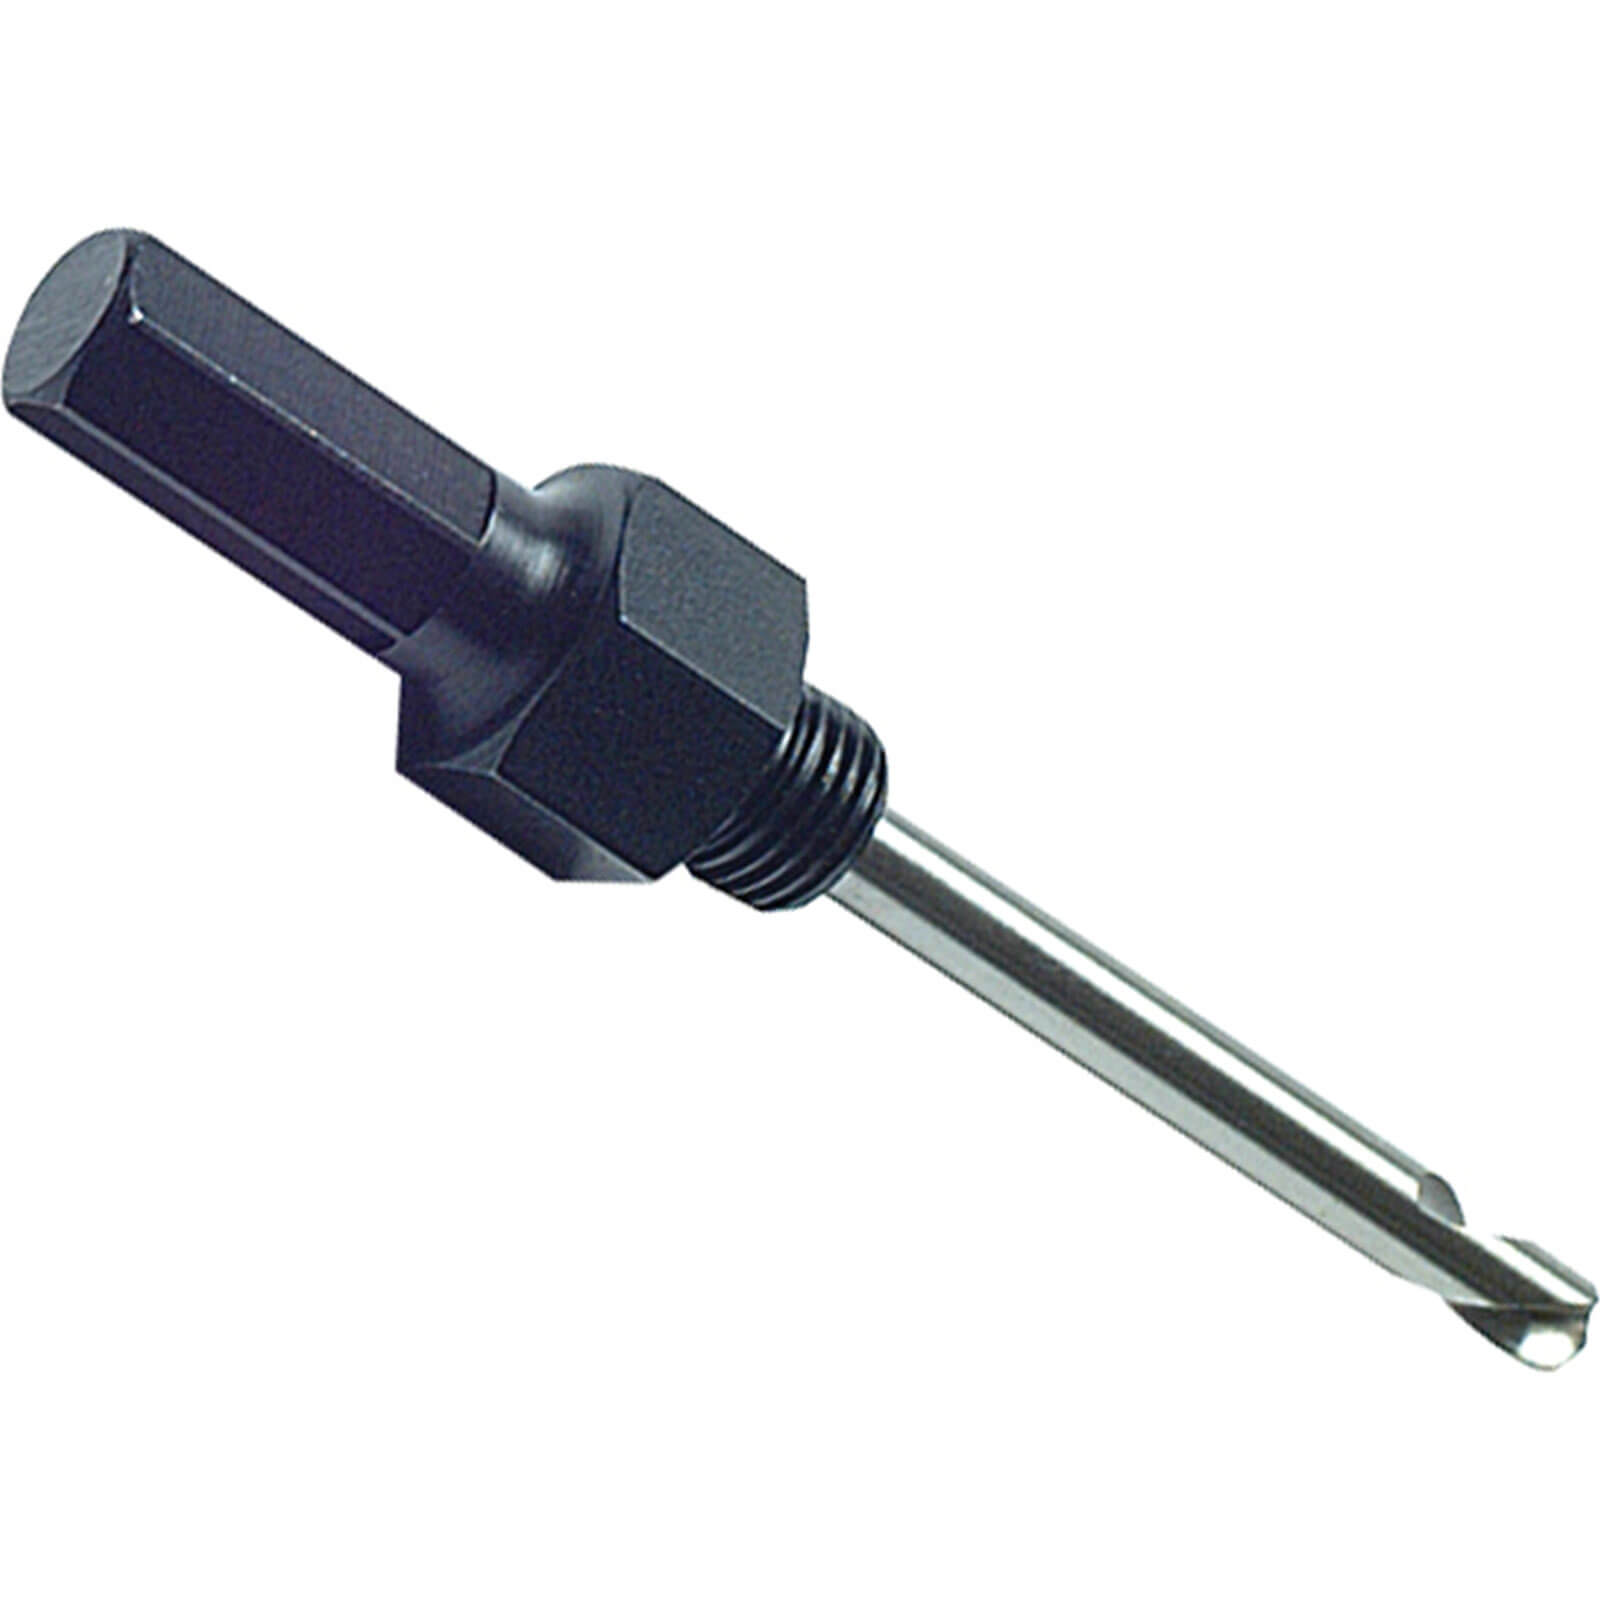 Photo of Bahco Arbor 11mm Shank To Suit 14mm - 30mm Hole Saws